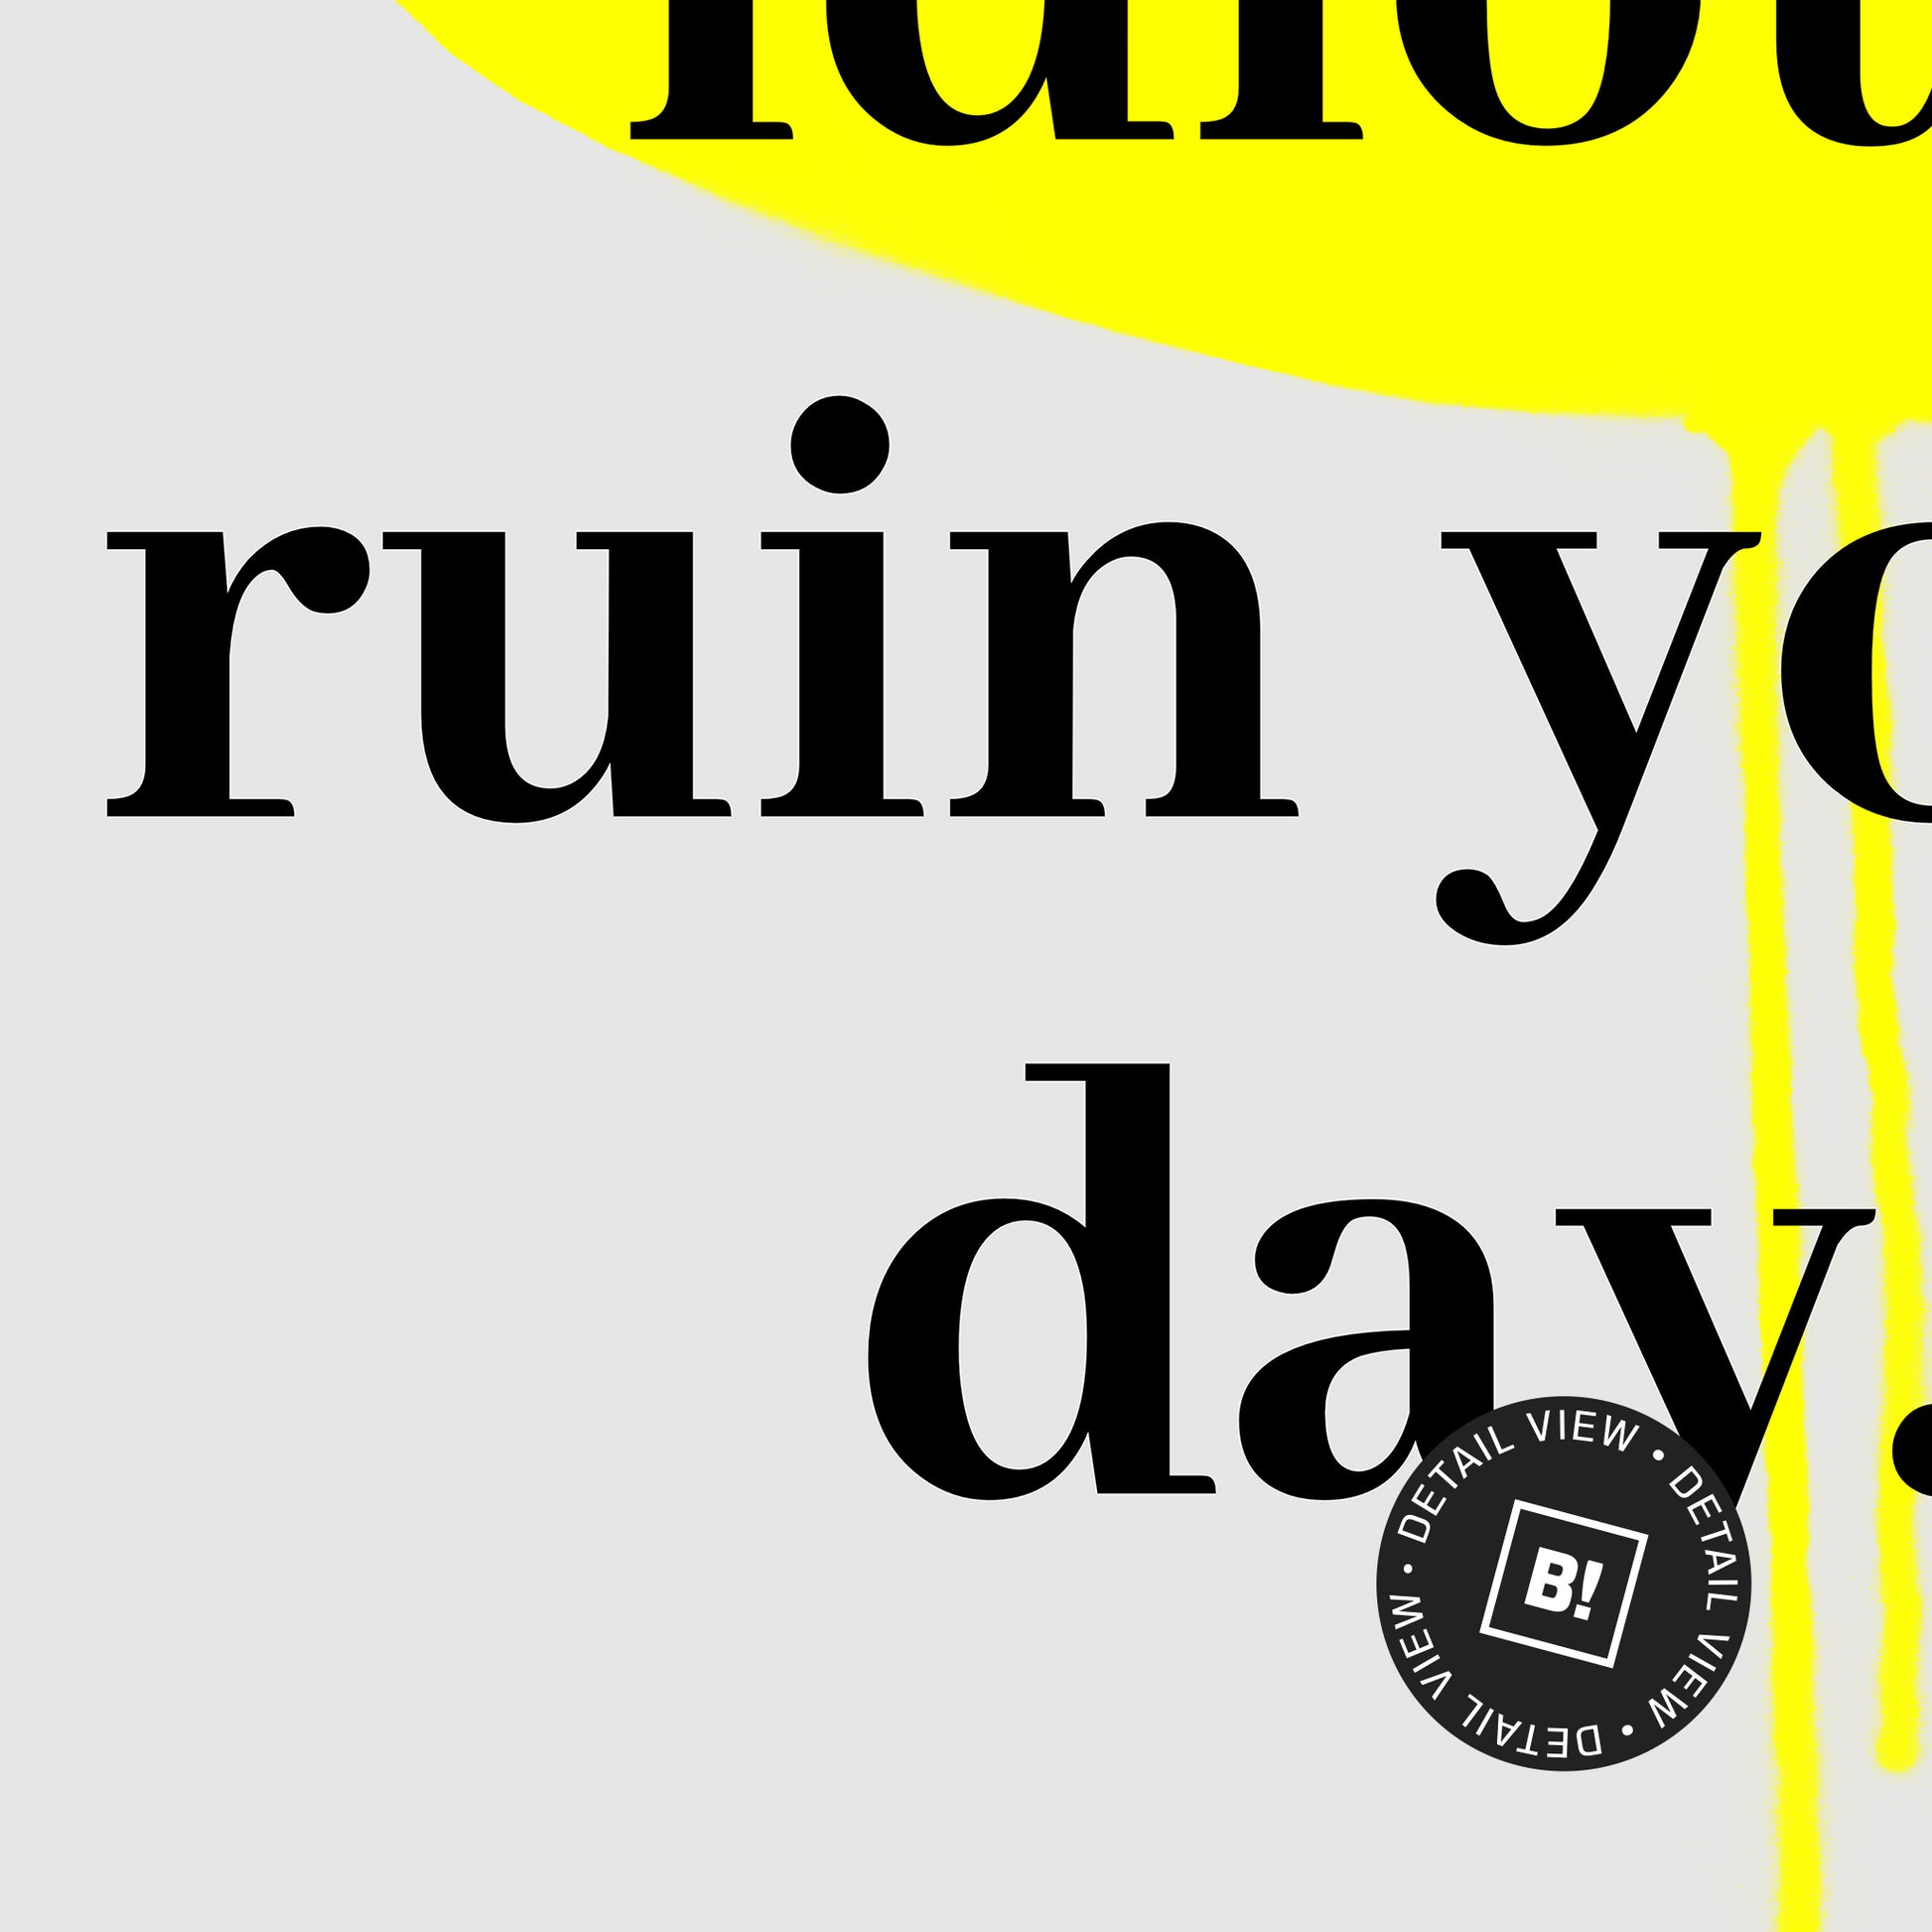 A detail view of our "Don't let idiots ruin your day" quote art print! This artwork was printed using the giclée process on archival acid-free paper and shows its timeless beauty in every detail.